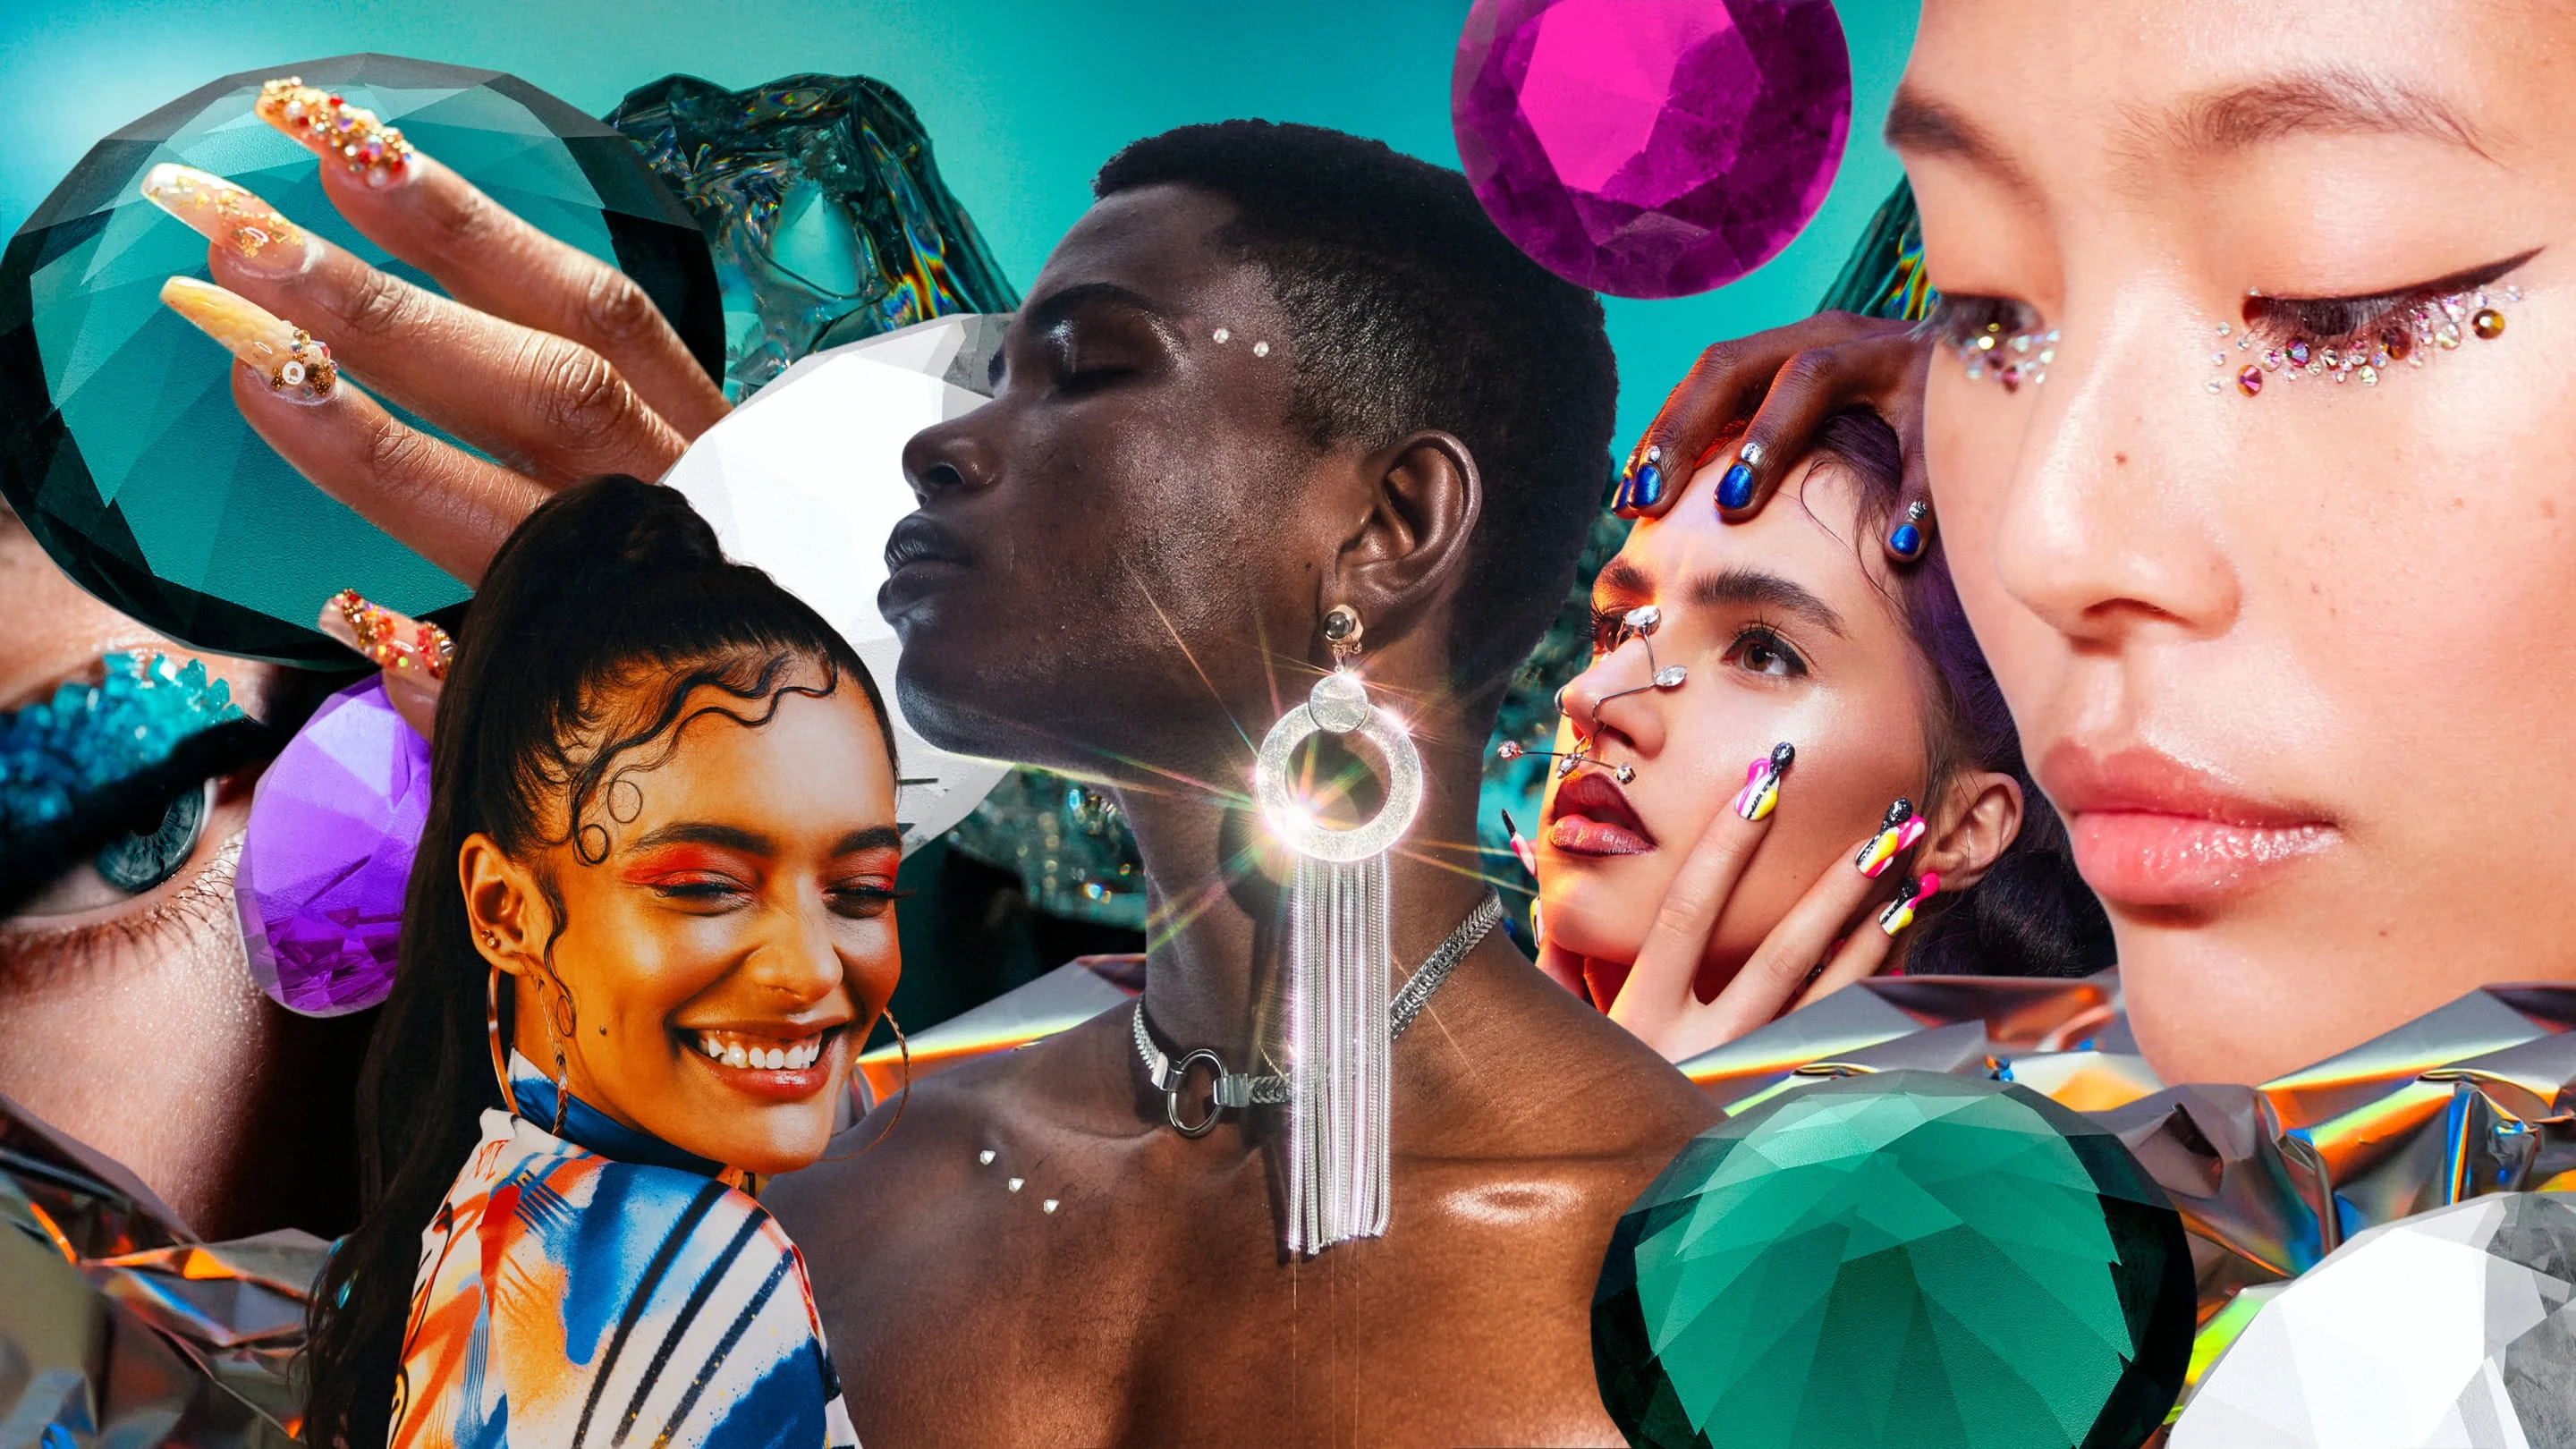 Collage showing different gemstones and people wearing gems. A Black woman on the left, with a high ponytail and combed edges, is smiling. A Black person in the centre is wearing a single, big shiny earring. An East Asian woman on the right has rhinestones under her eyes. A woman with sparkly blue eye make-up is on the bottom left. Gemstones are in the background, behind a hand with jewelled fingernails.
